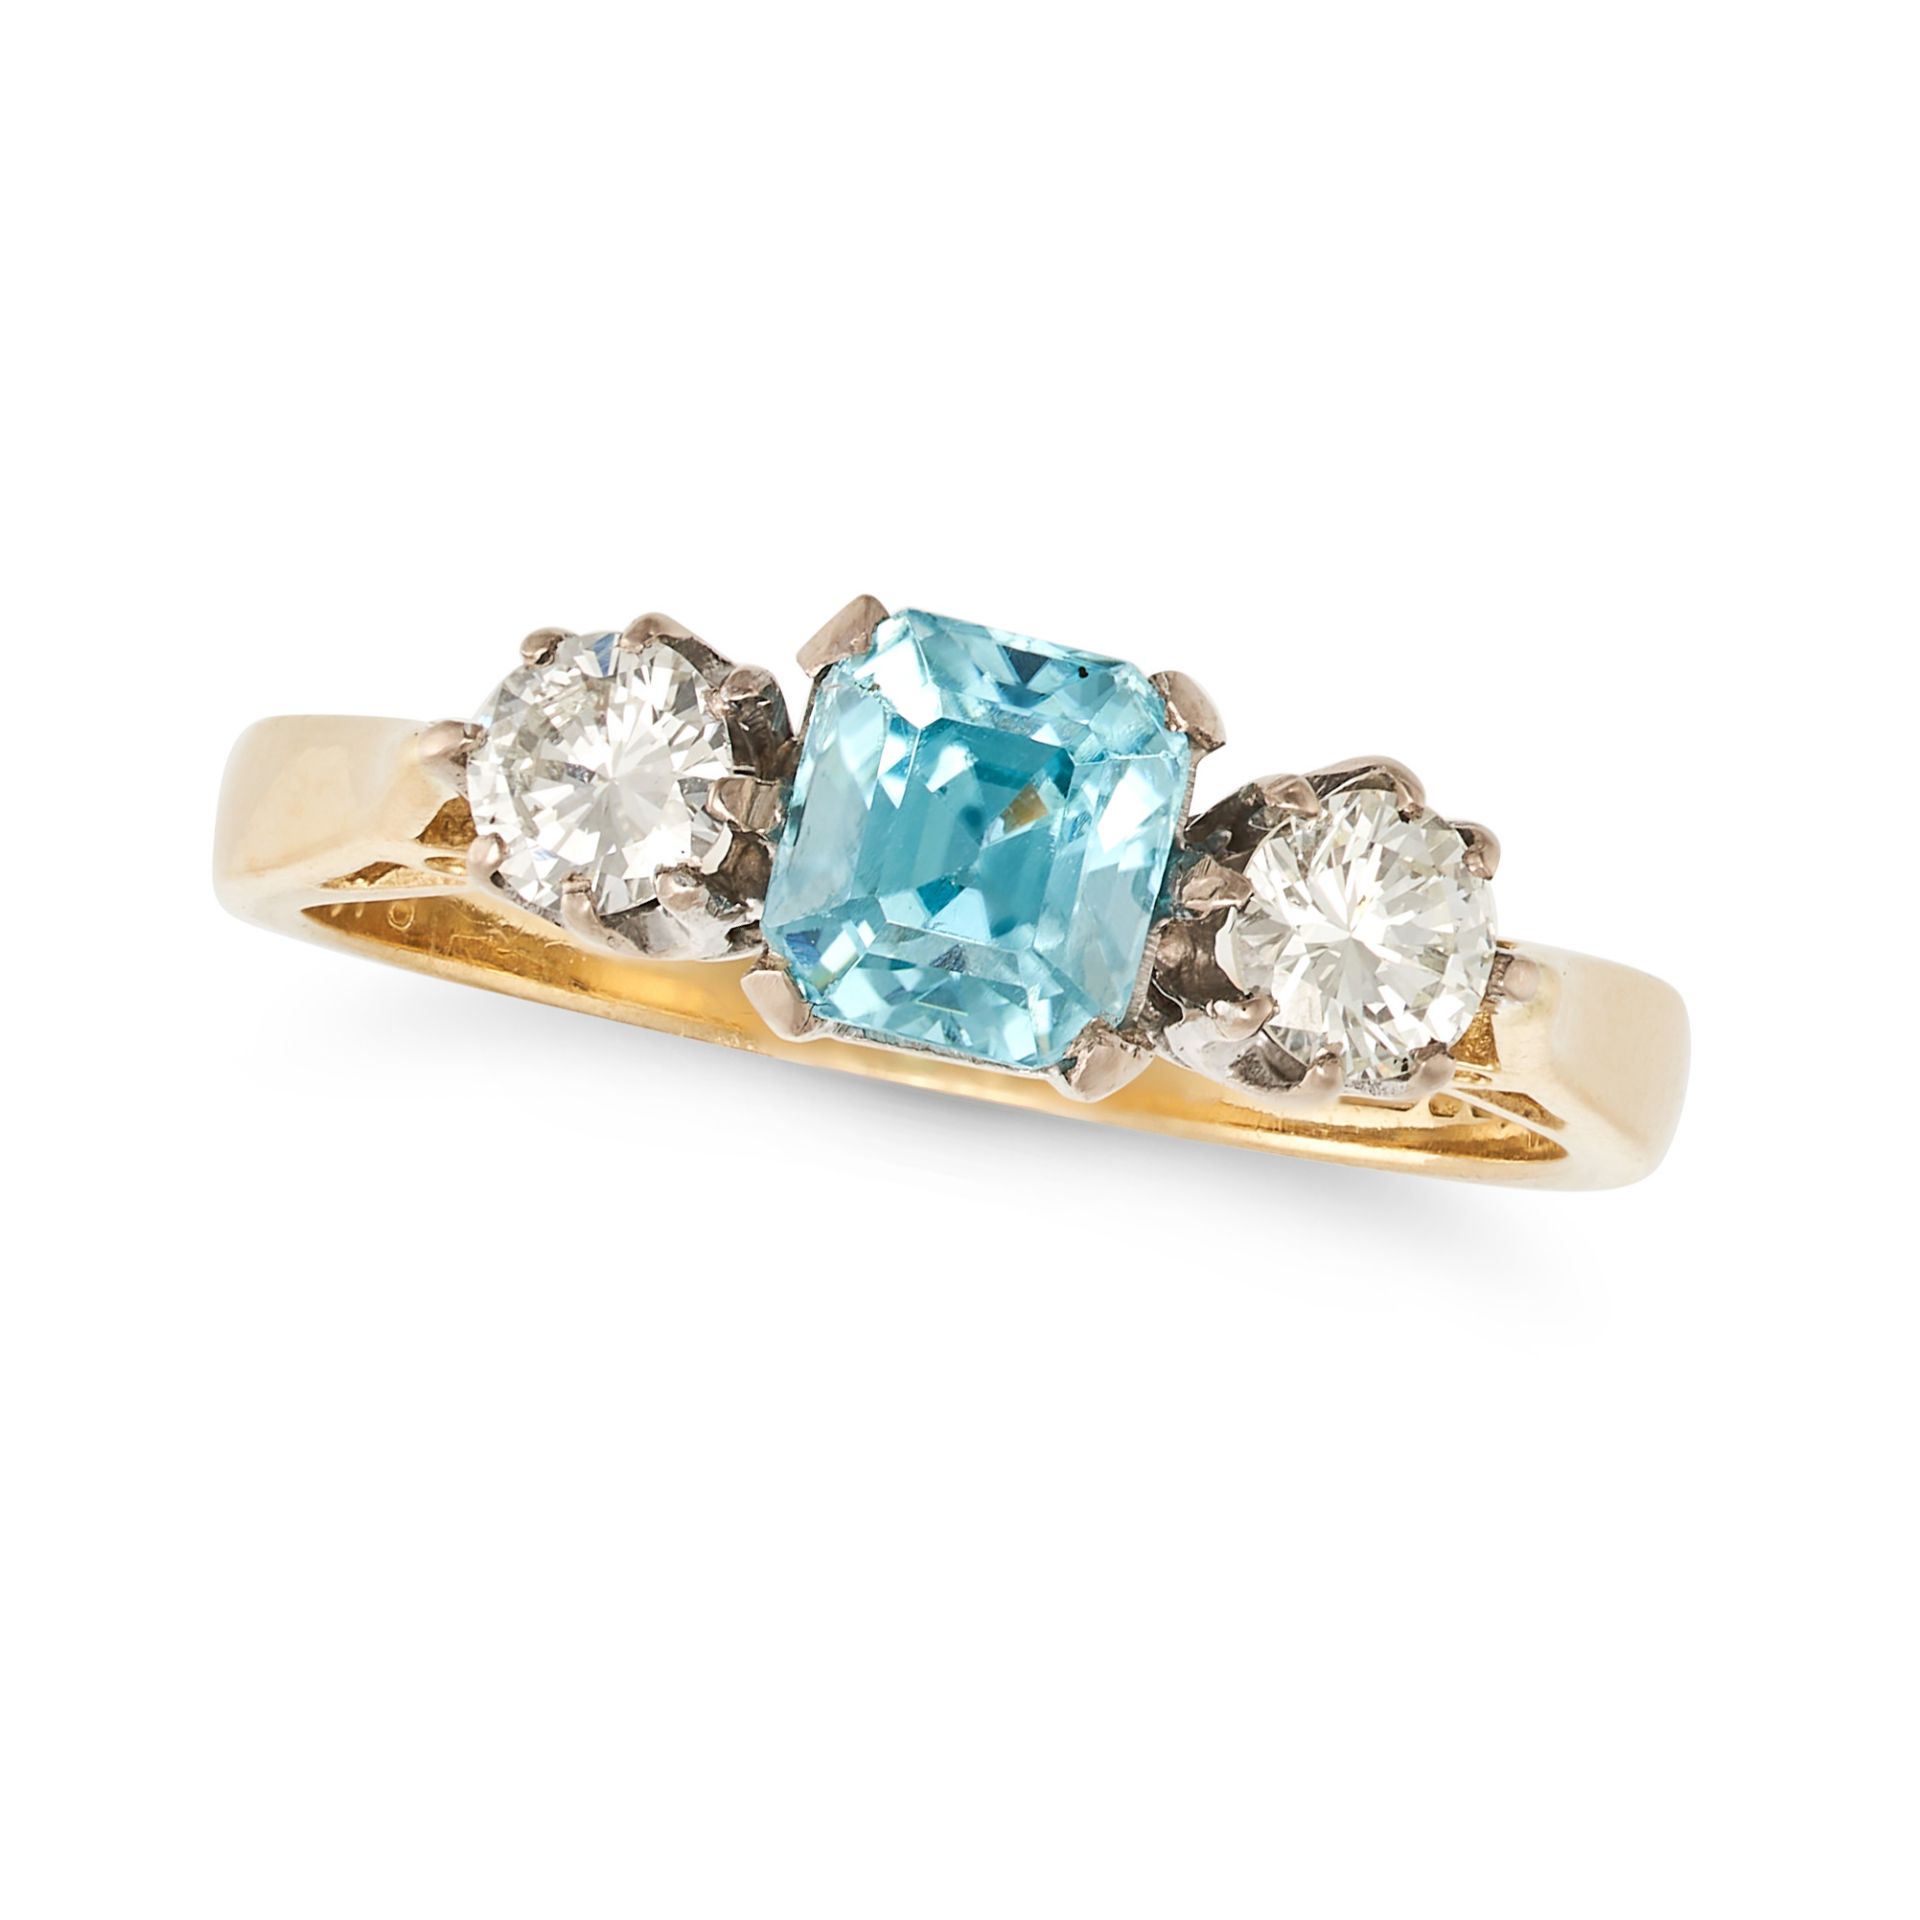 A BLUE ZIRCON AND DIAMOND THREE STONE RING in 18ct yellow gold, set with an octagonal mixed cut b...